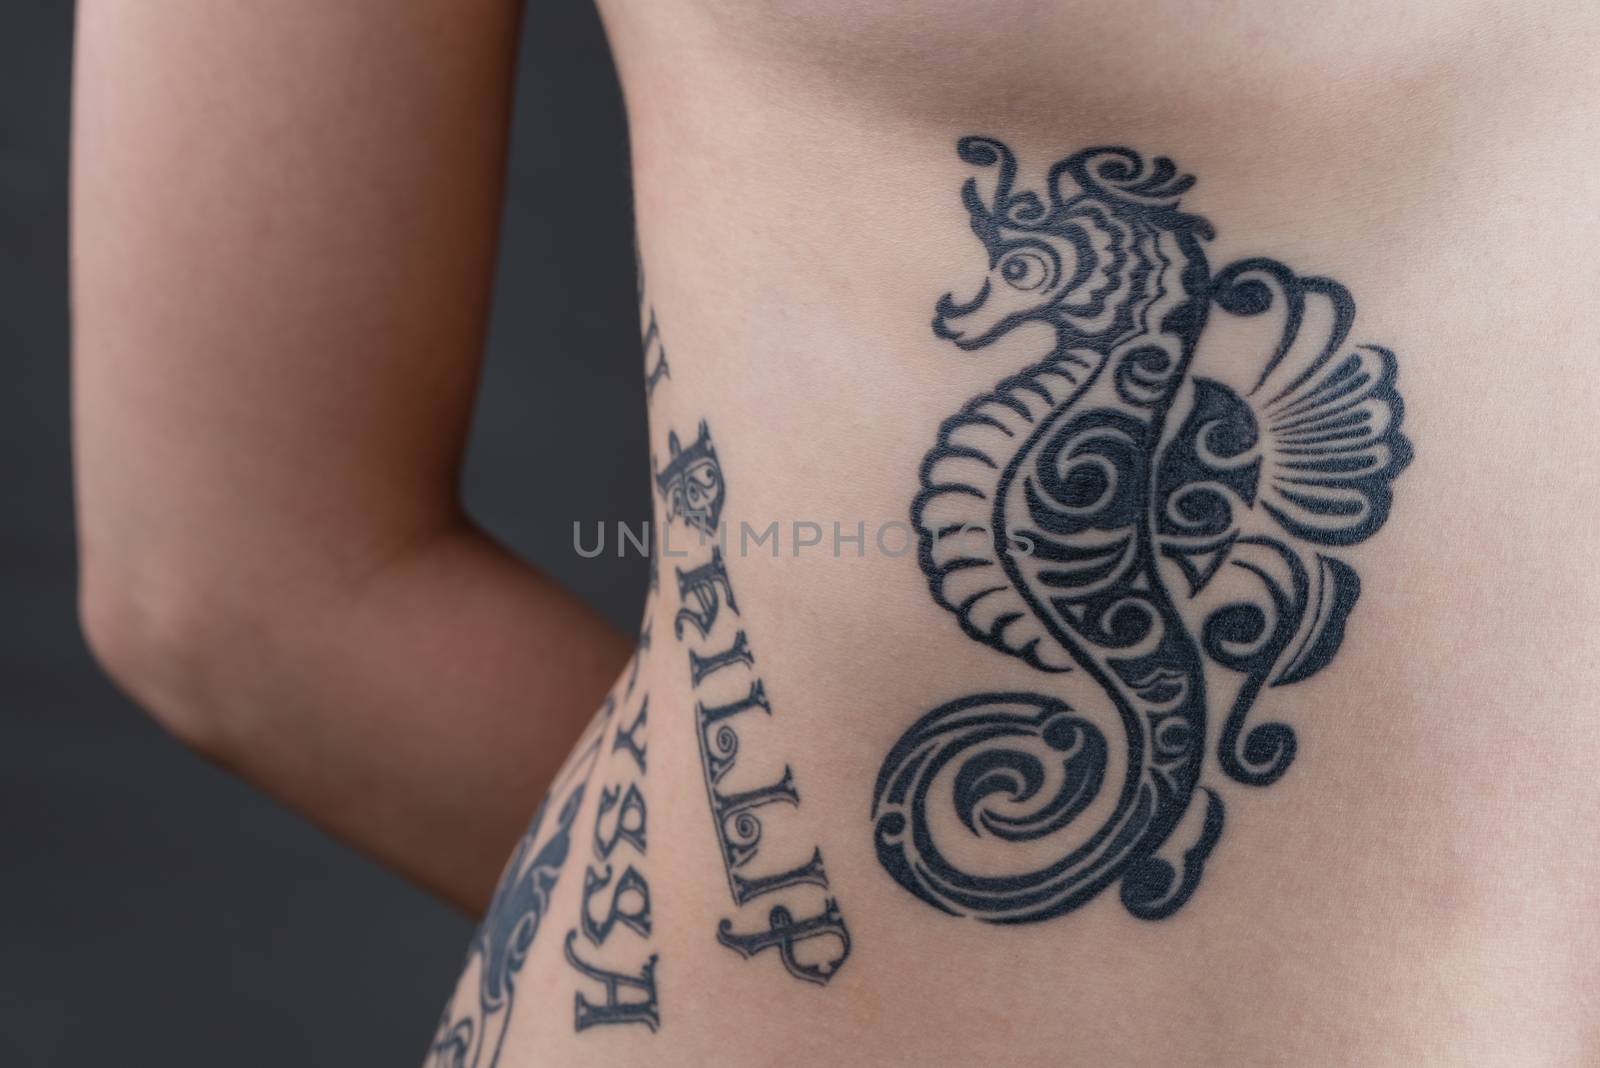 A tattoo of a black tribal style seahorse with children's names wrapping around a woman's ribs.